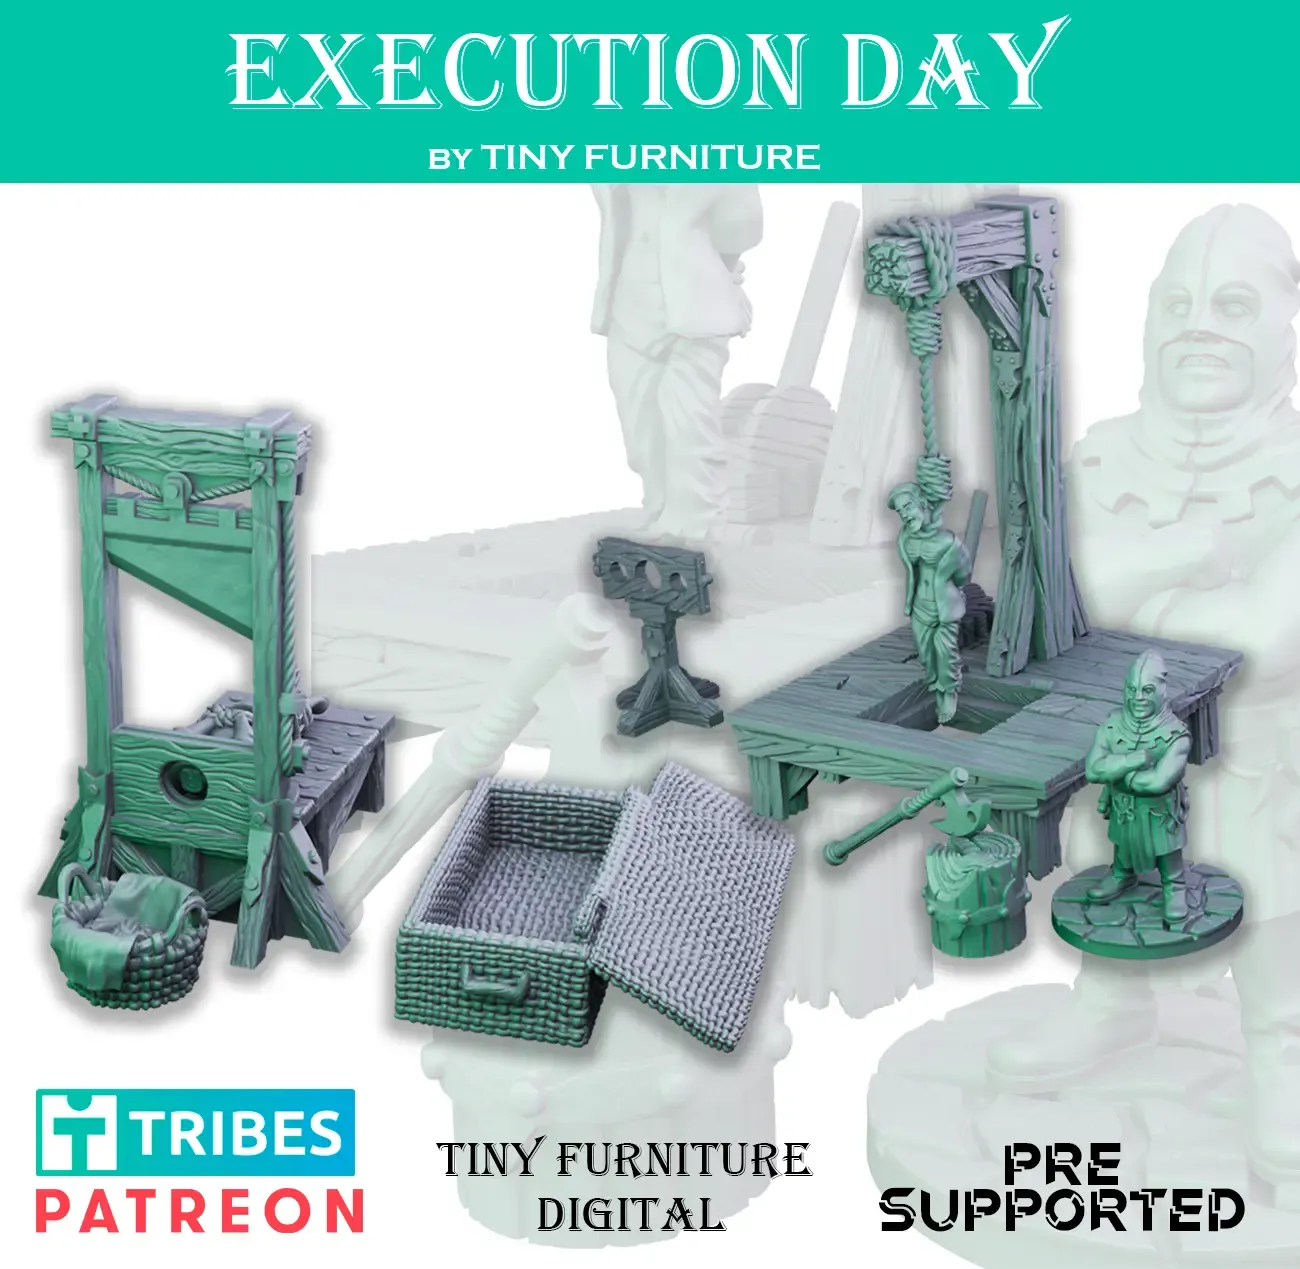 The Execution Day